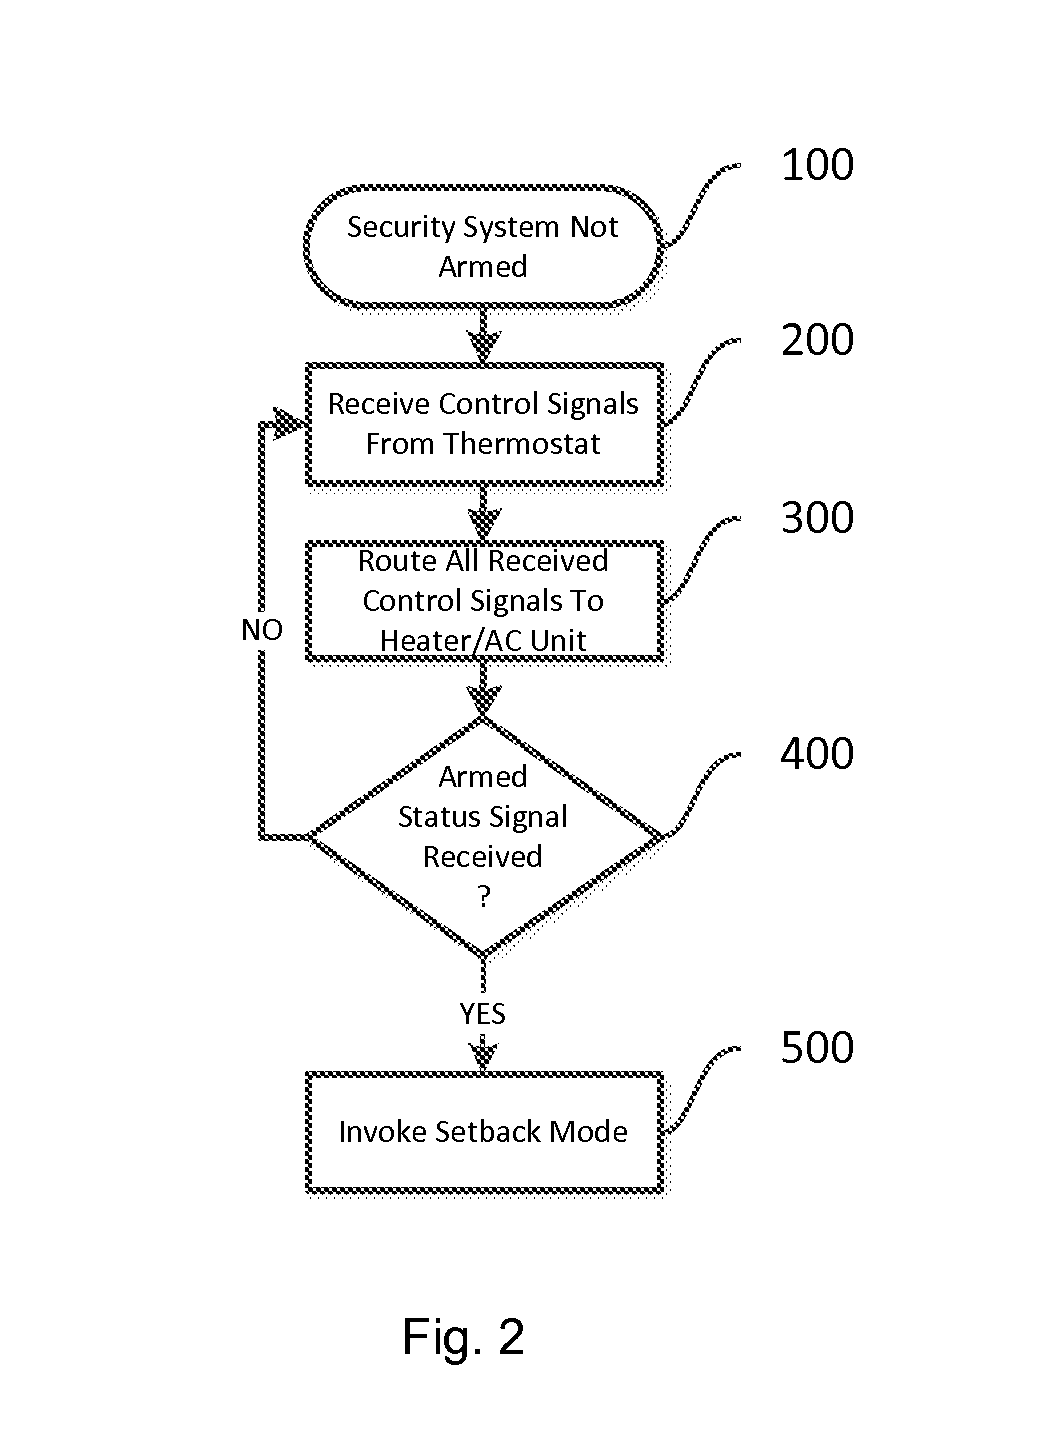 Auxiliary controller for an HVAC system and method of operation